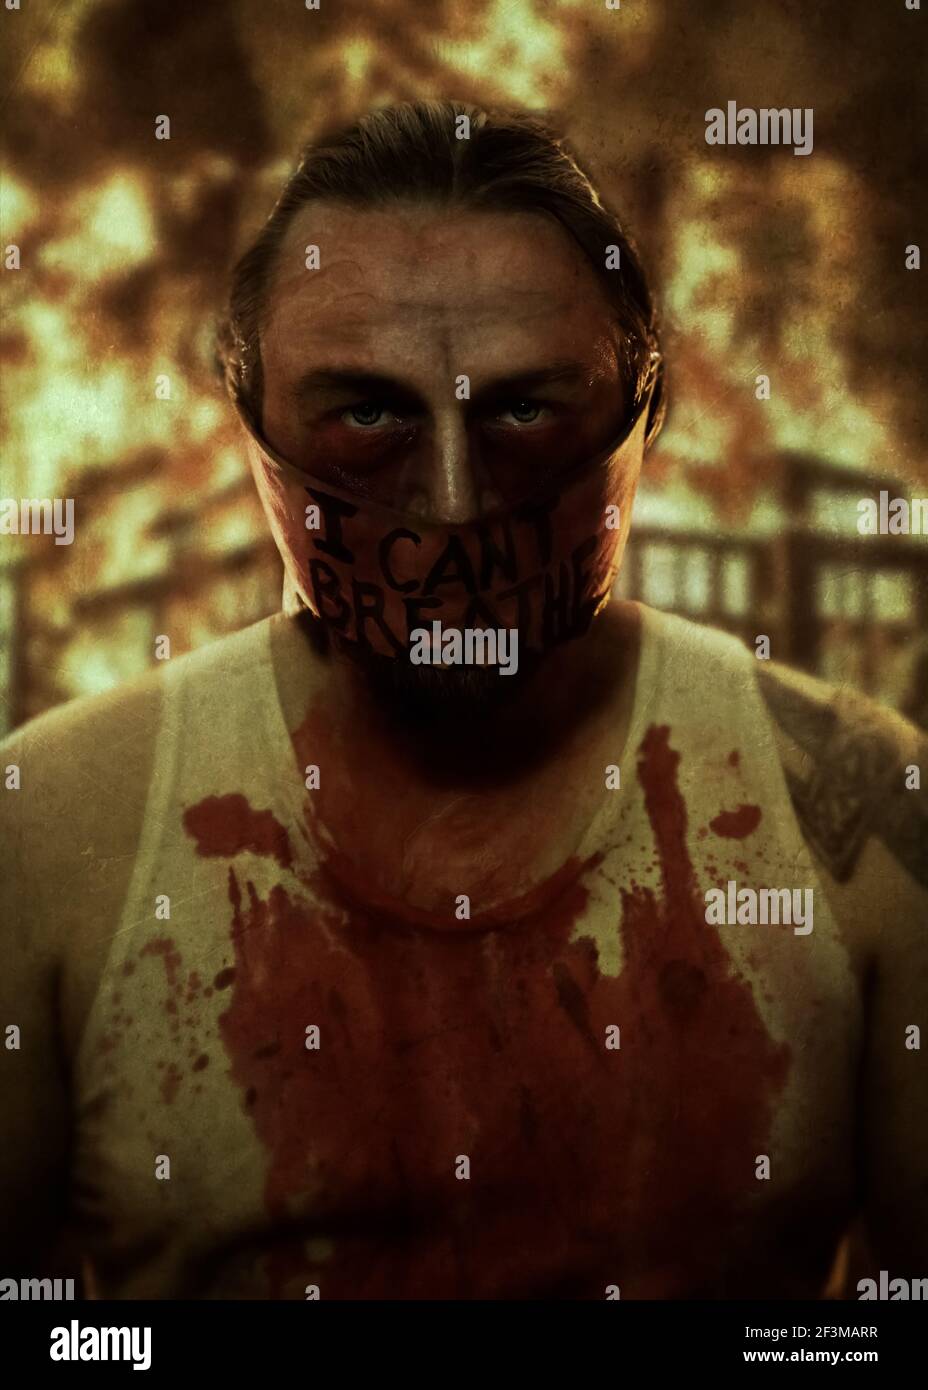 I cant breathe Caption on man face mask and burning city at night buildings Symbol of protest News illustration info articles blogs publication print Stock Photo